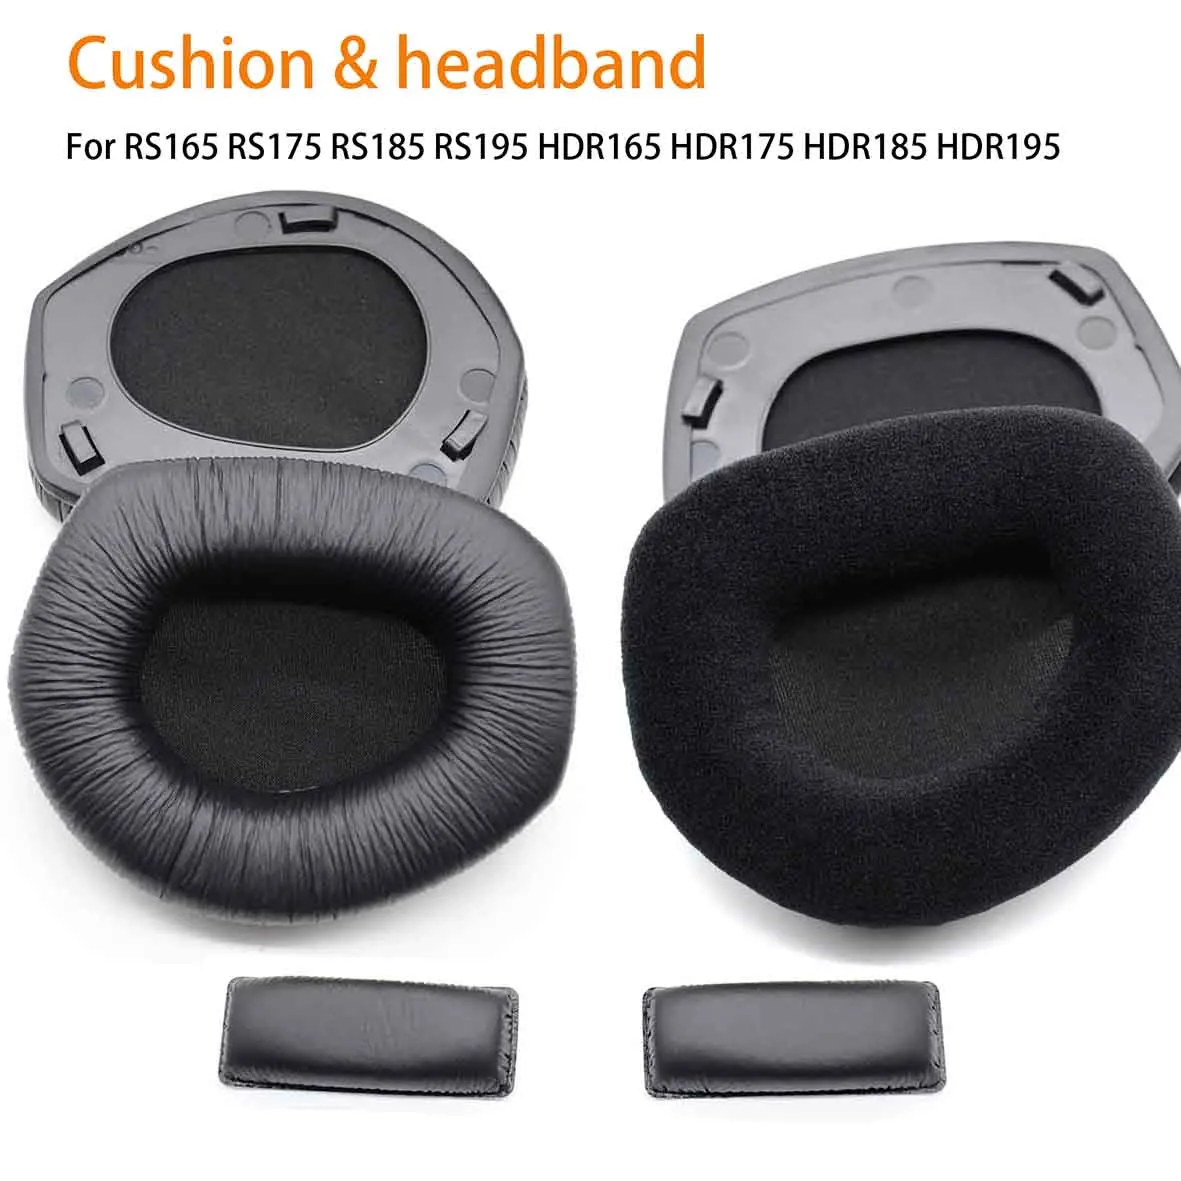 

New Velvet Replacement Ear Pads Earpads Earmuffs for Sennheiser RS165 RS175 RS185 RS195 HDR165 HDR175 HDR185 HDR195 Headphone